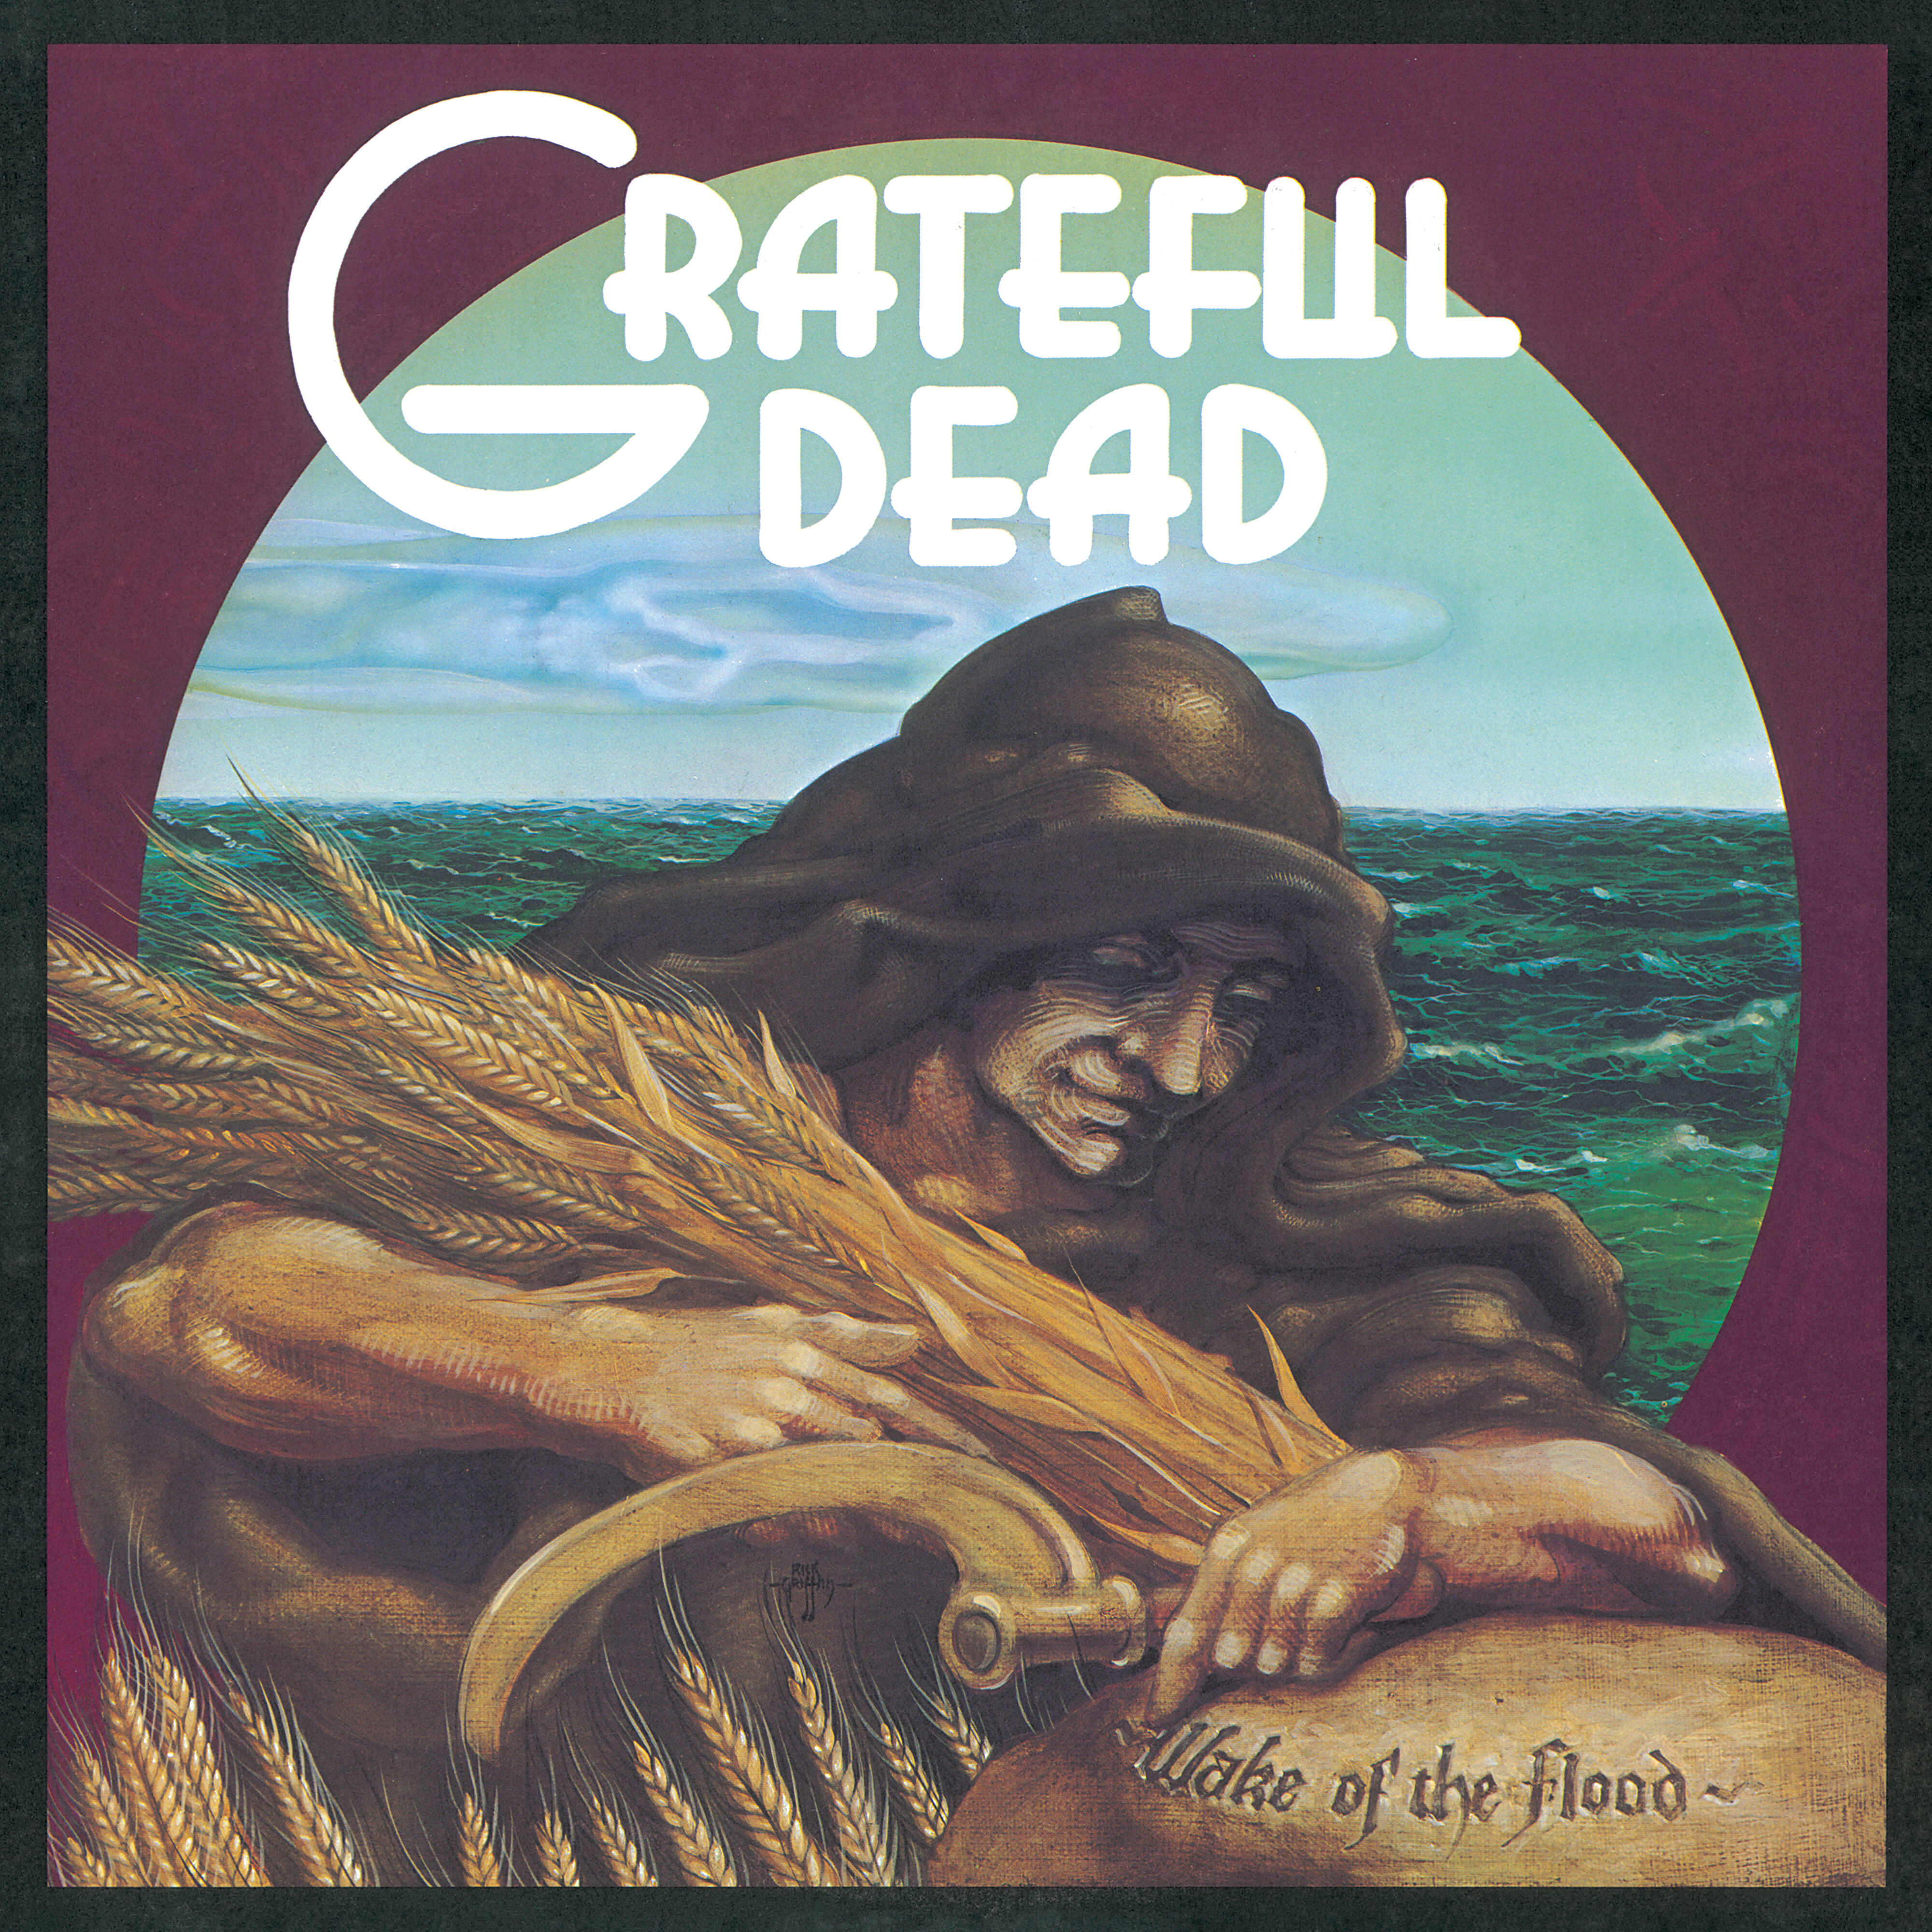 Grateful Dead - Wake of the Flood (50th Anniversary Deluxe Edition)  (2023) [24Bit-192kHz] FLAC [PMEDIA] ⭐️ Download